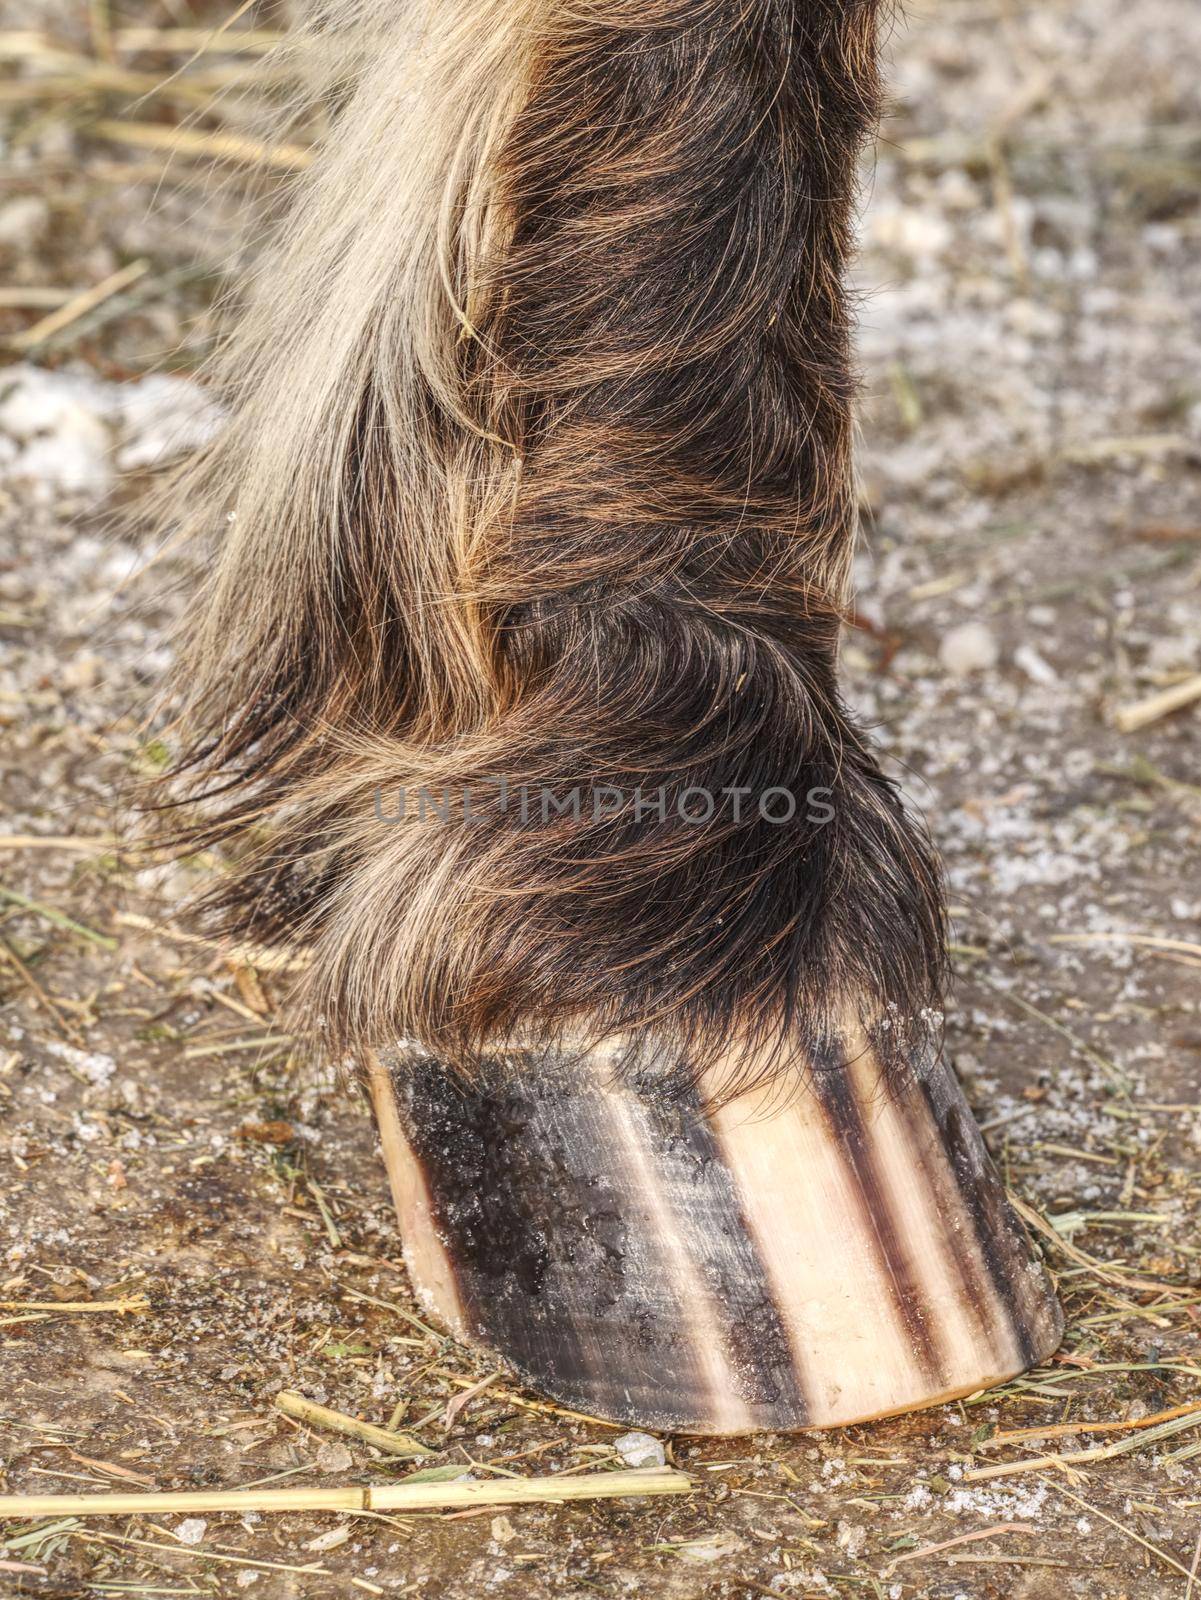 Striped hoof of brown dotted ponny horse, detail of stripes.  by rdonar2